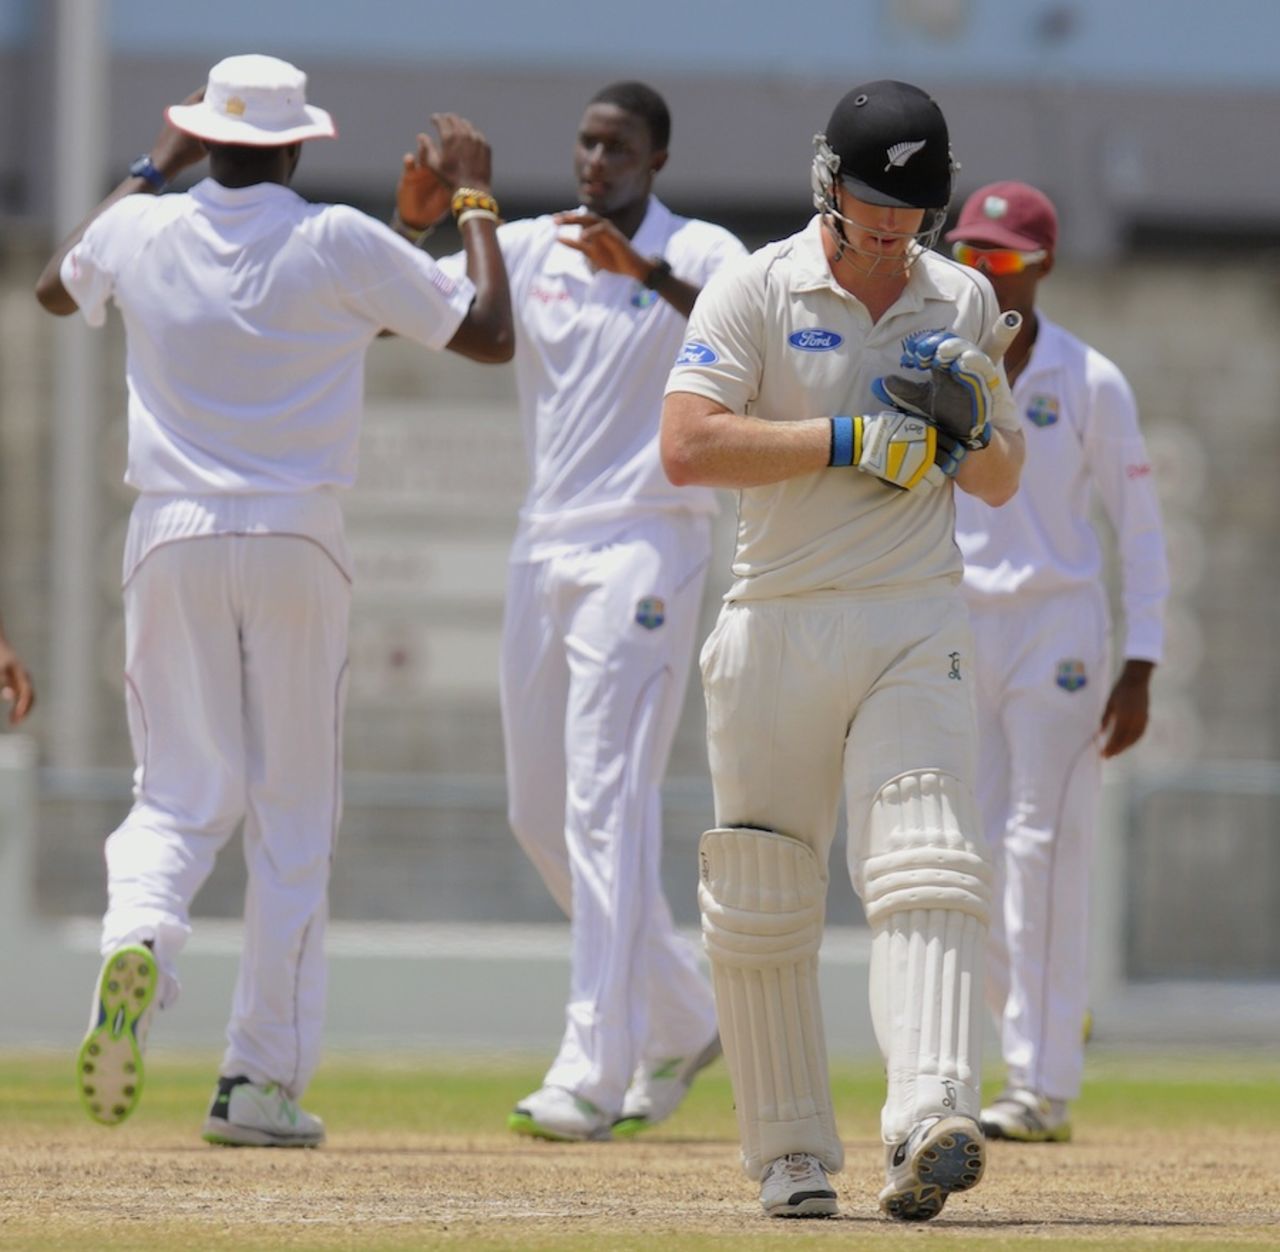 Jimmy Neesham was dismissed for 51, West Indies v New Zealand, 3rd Test, Barbados, 4th day, June 29, 2014